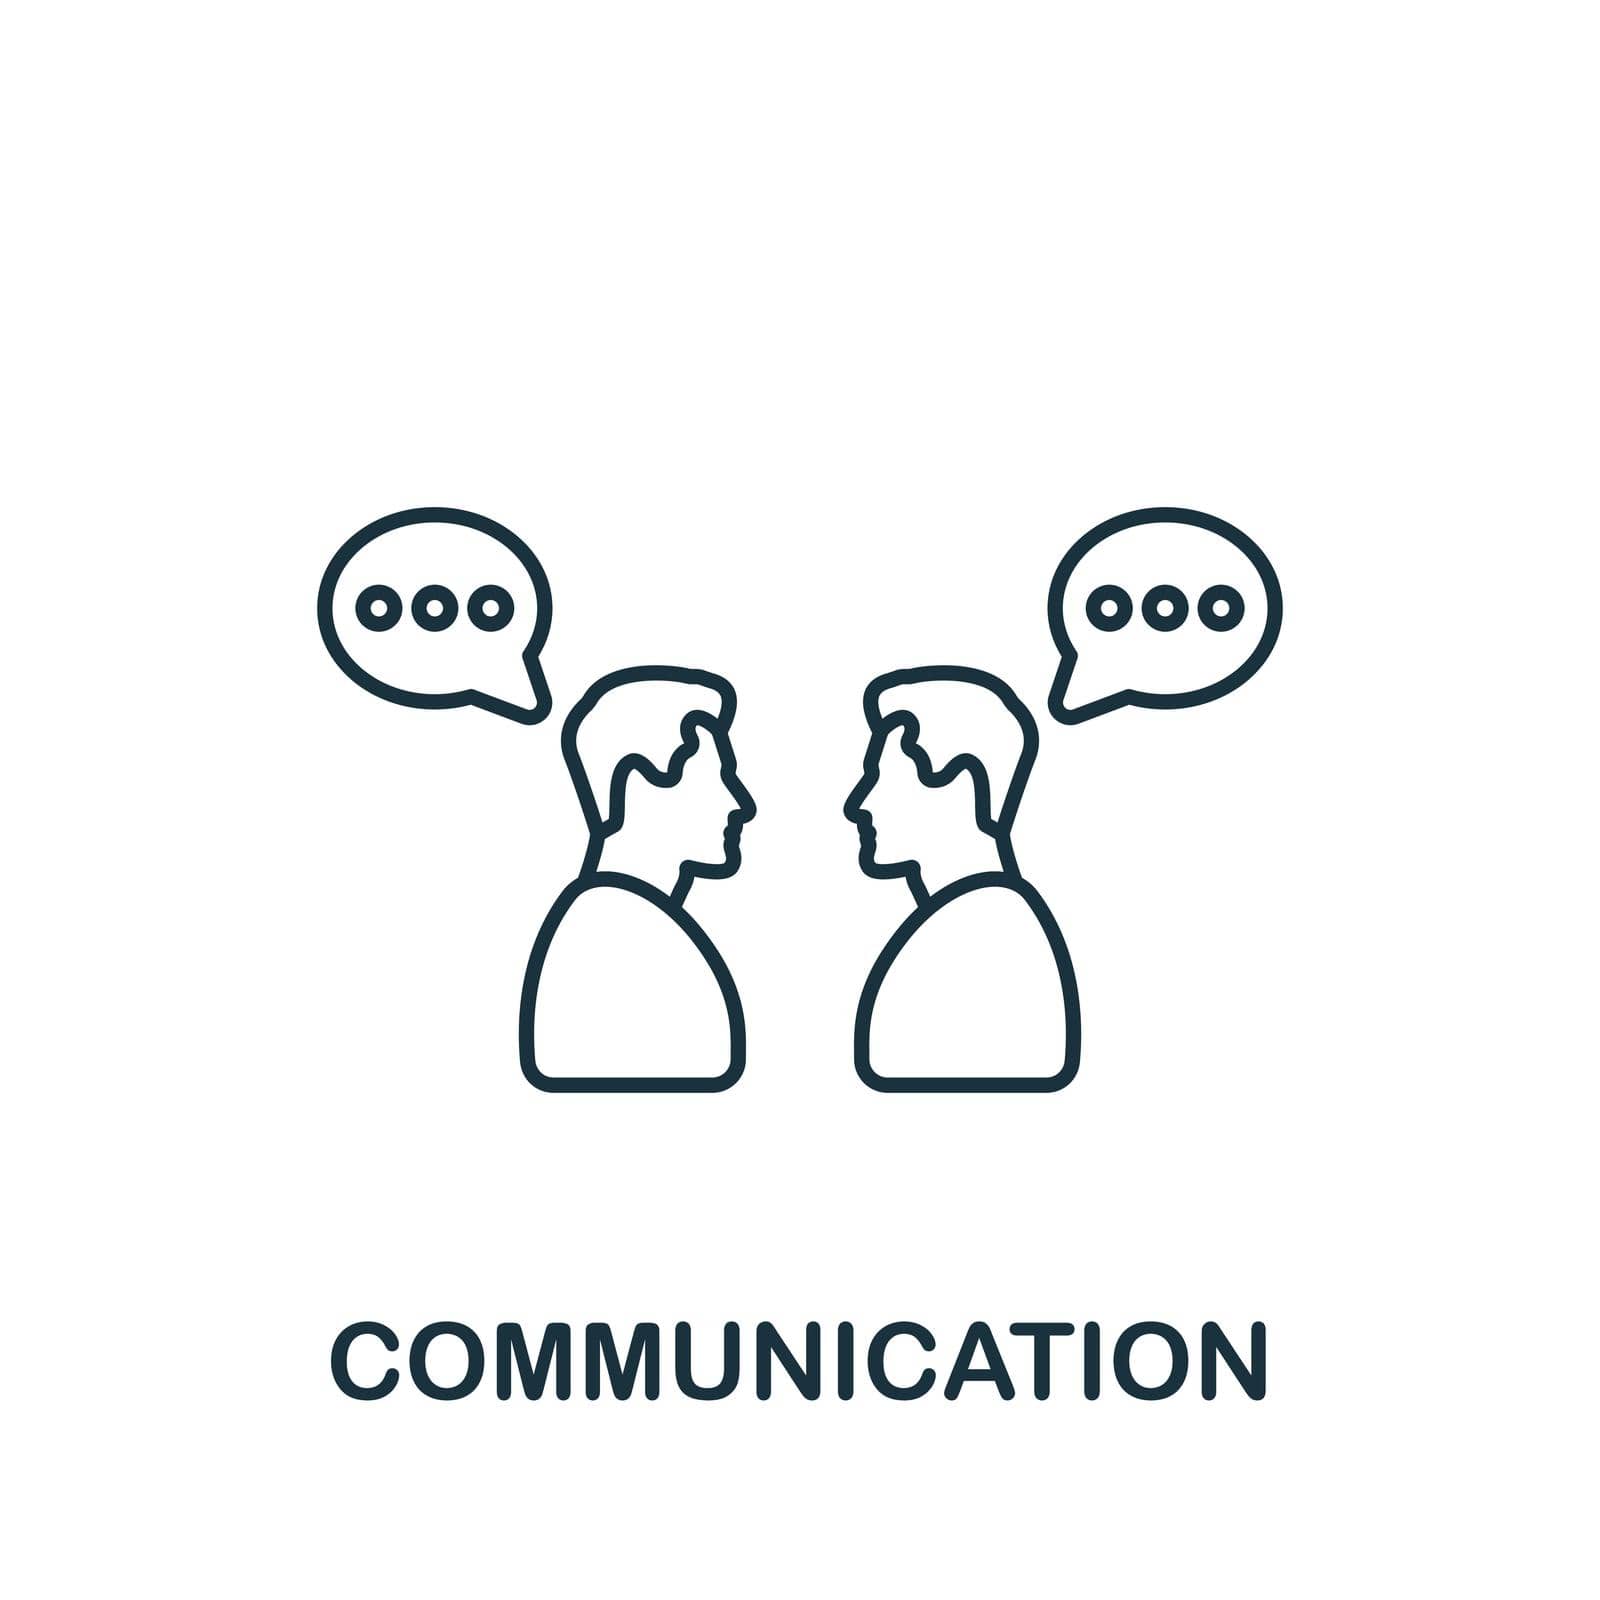 Communication icon. Simple line element business motivation symbol for templates, web design and infographics.